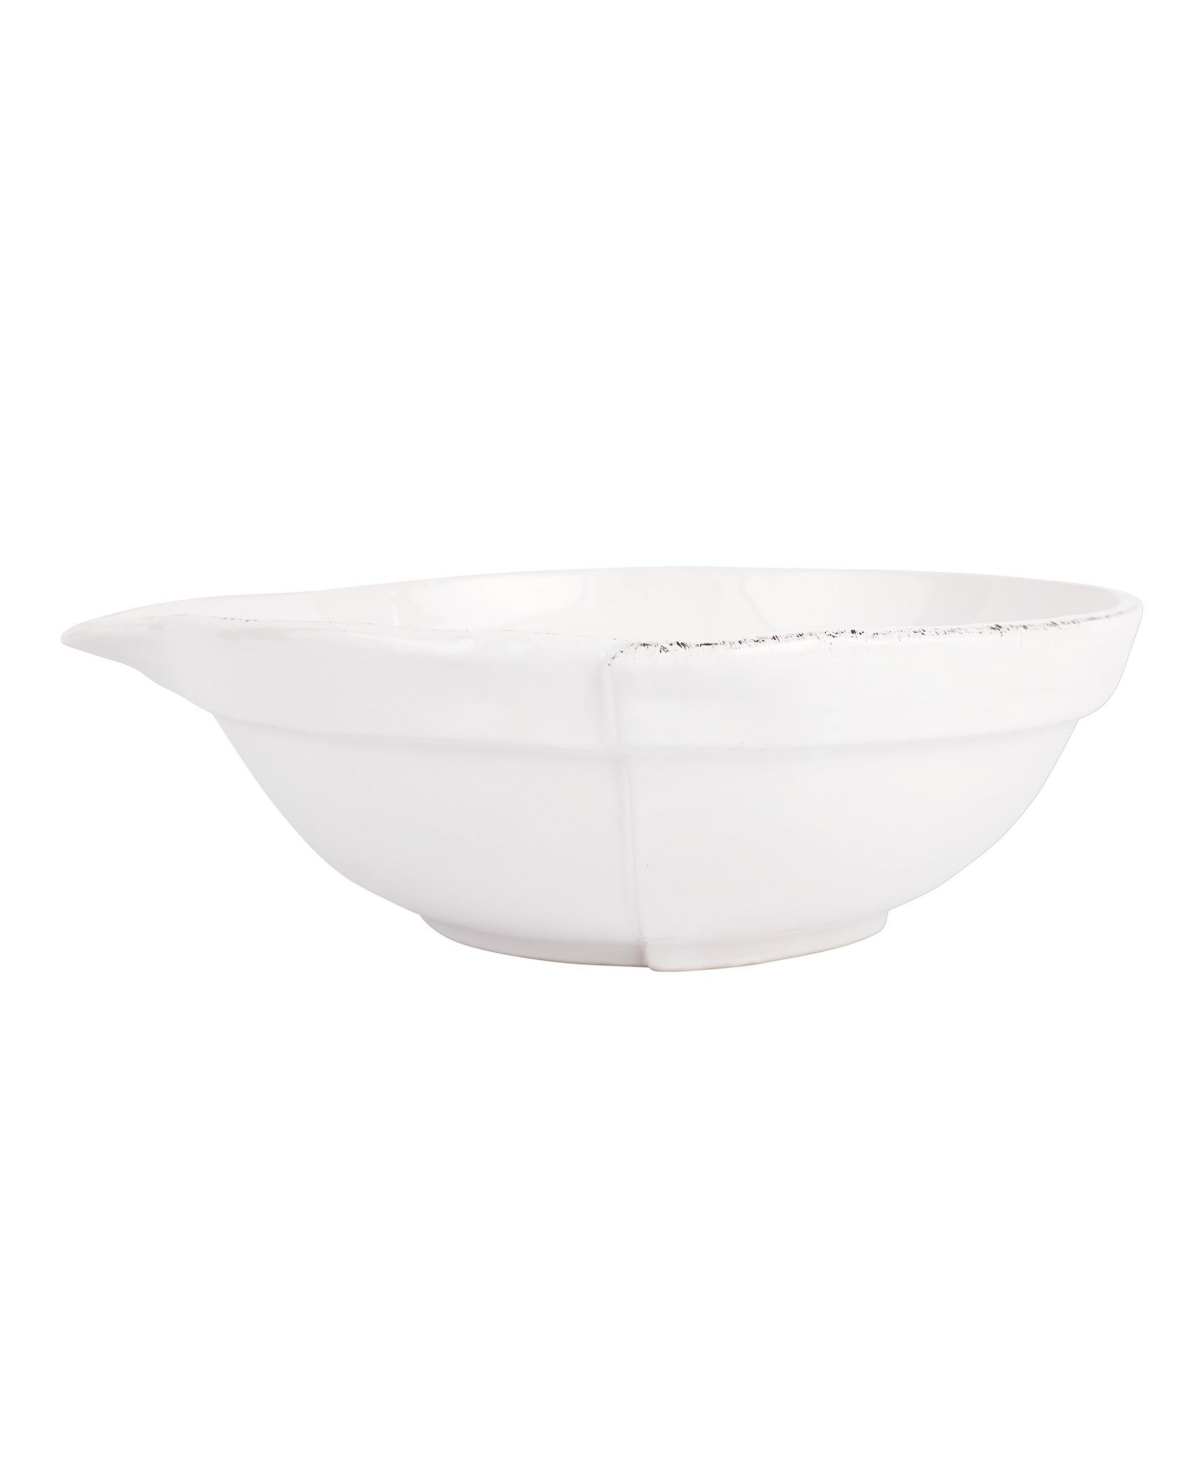 Vietri Lastra Large Mixing Bowl In White